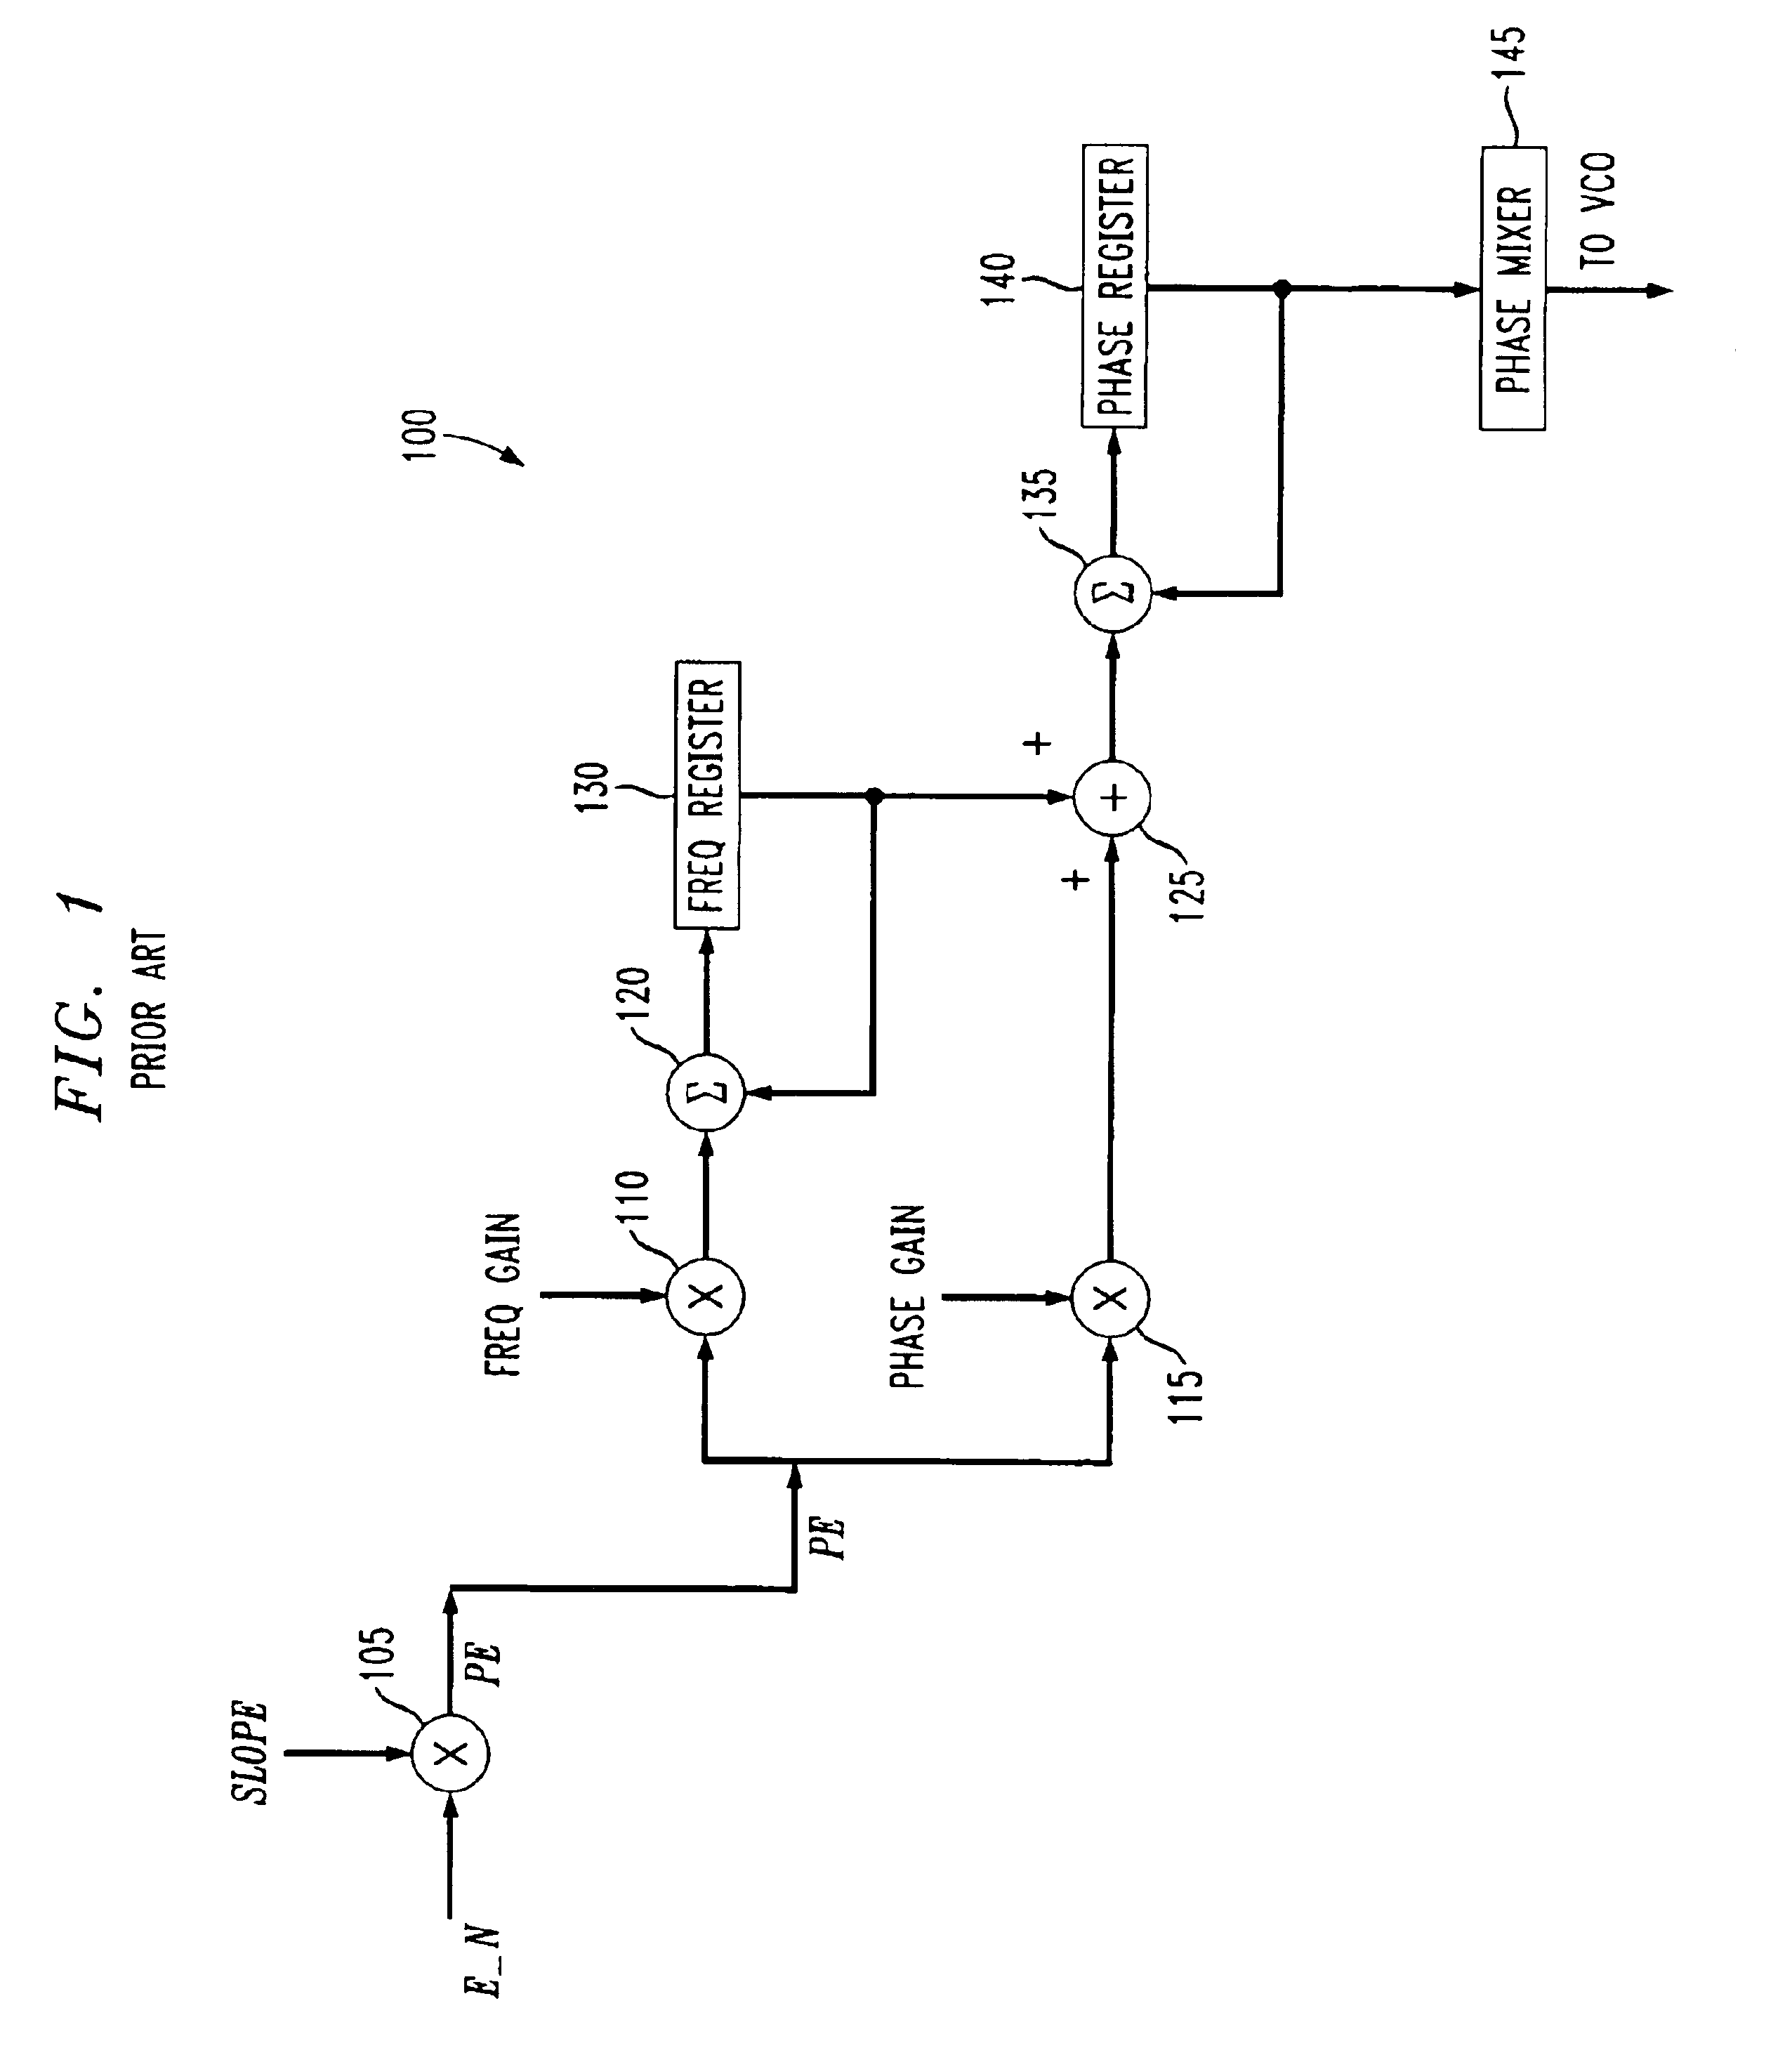 Scheme to improve performance of timing recovery systems for read channels in a disk drive